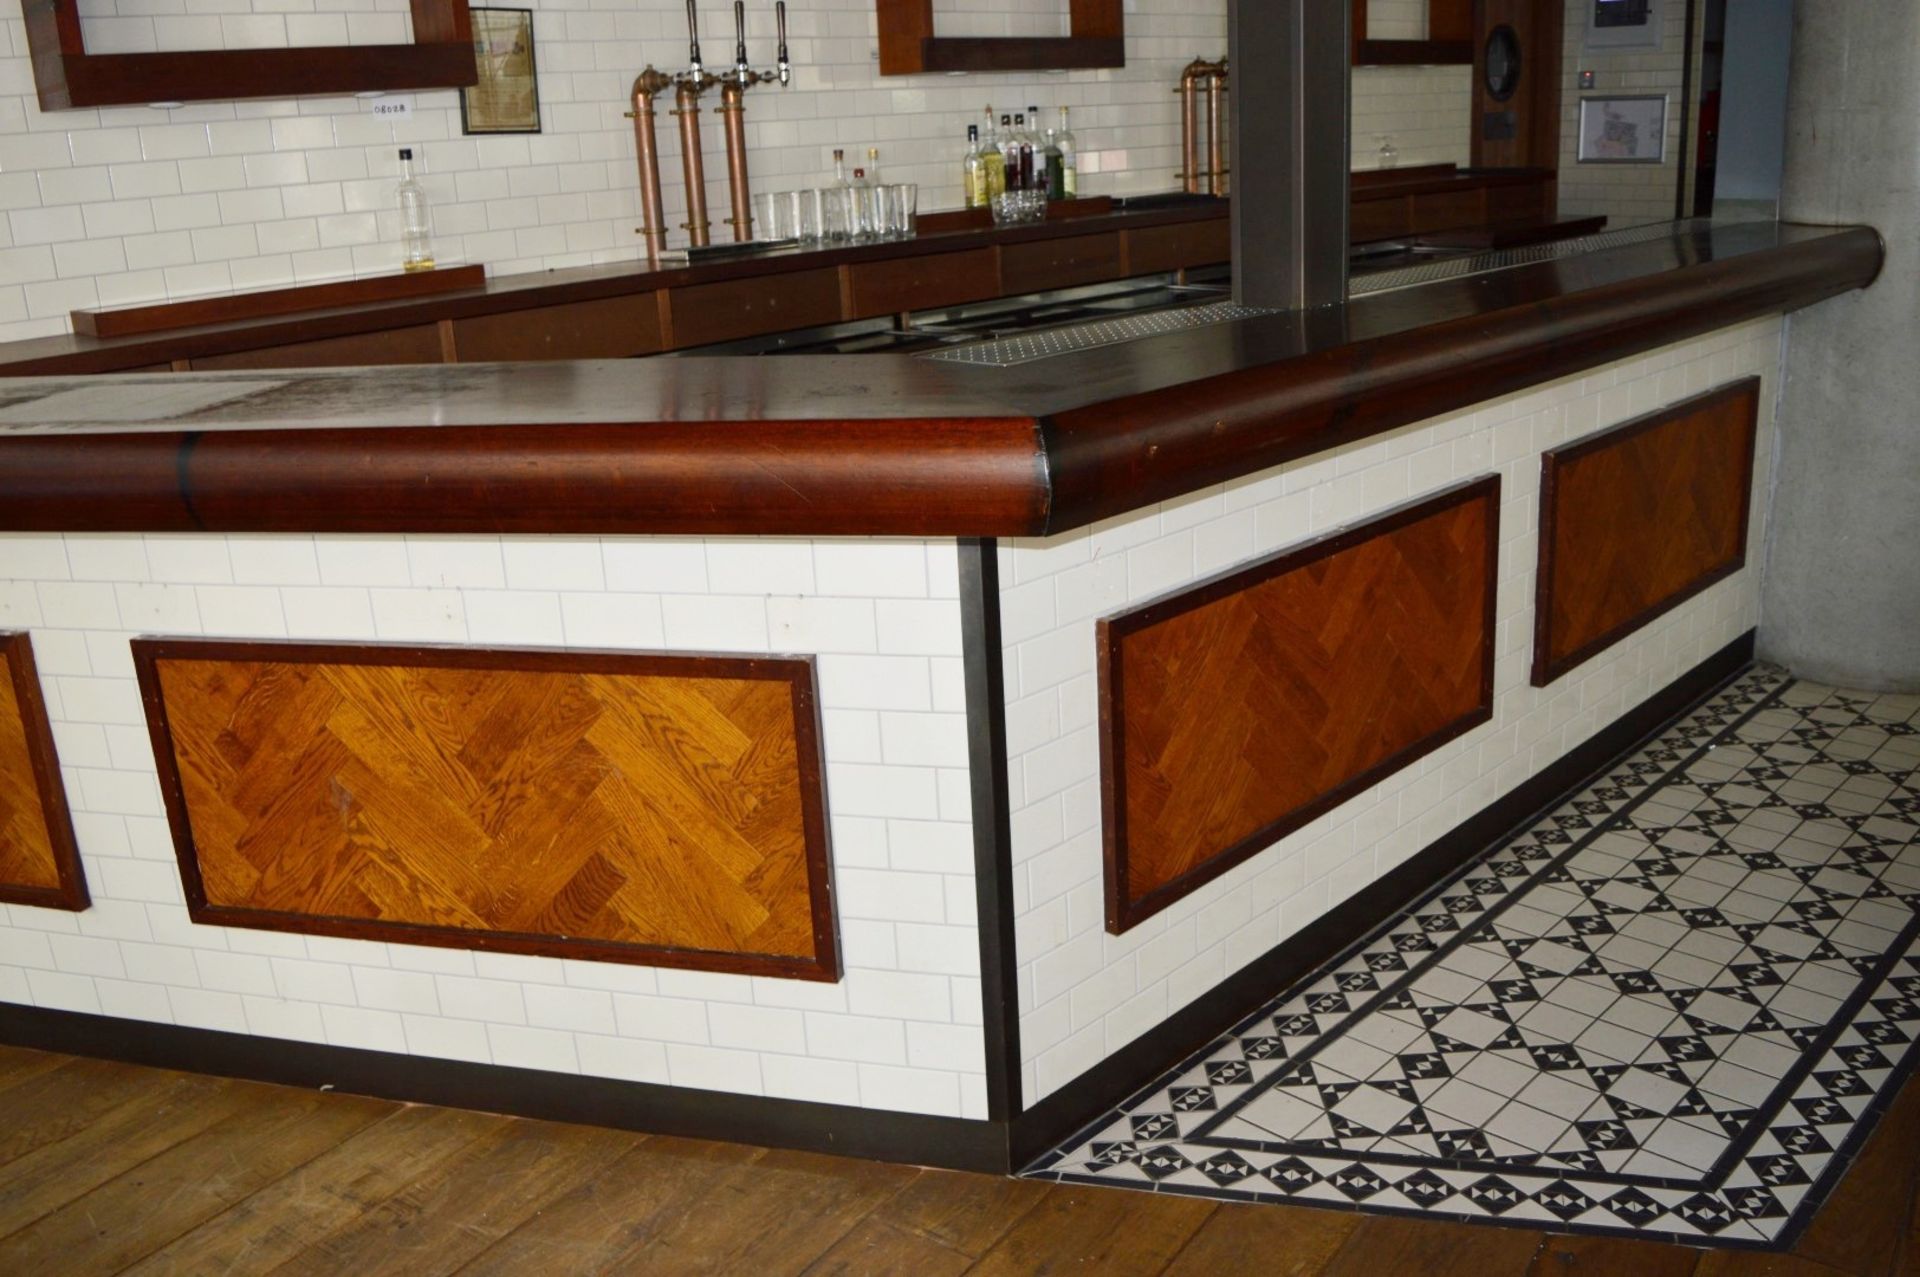 1 x Large Pub / Restuarant Bar With Tiled Front and Framed Parquet Flooring Design - Also Includes - Image 8 of 25